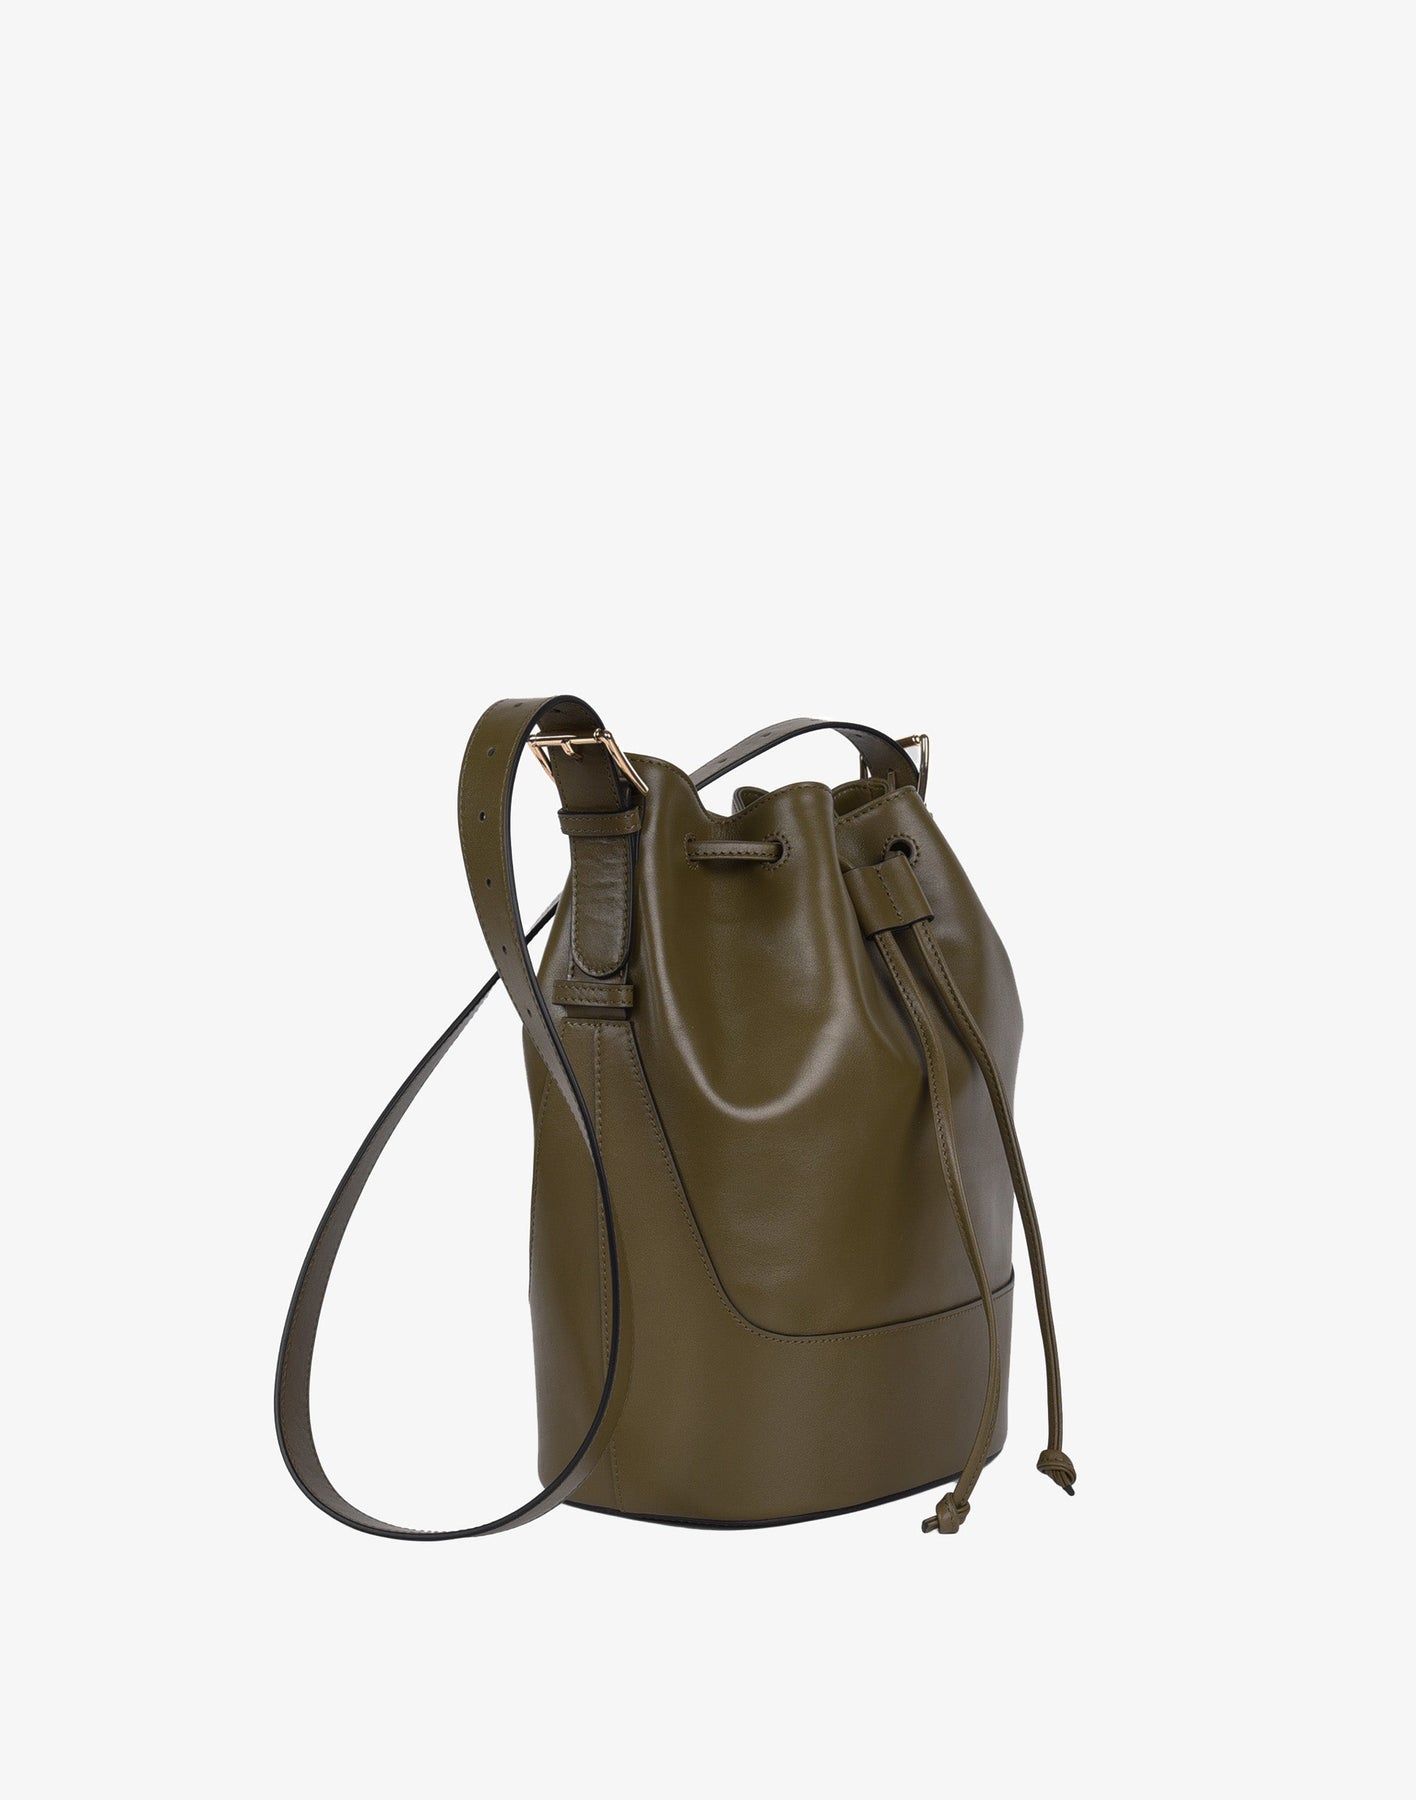 Luxe Cinch Bucket Bag - Olive – For Days